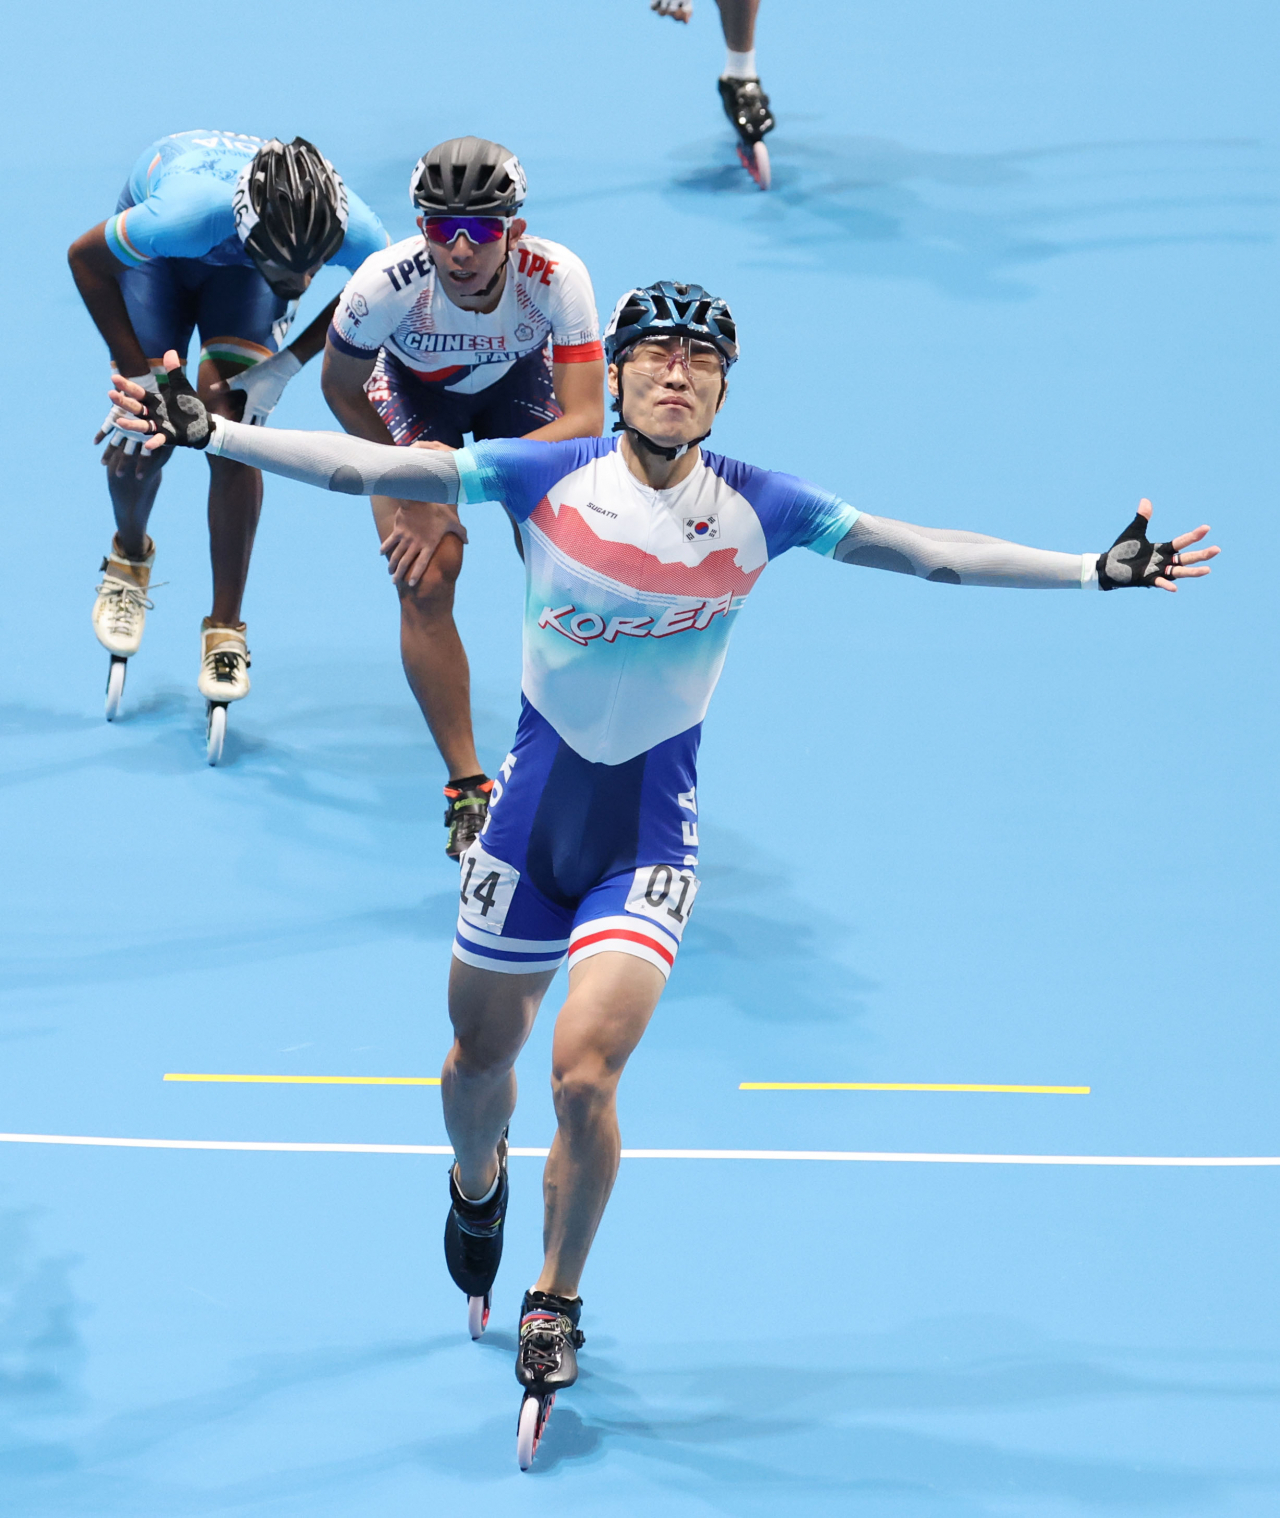 Choi Gwang-ho of South Korea celebrates after winning the men's 1,000-meter sprint event at the 19th Asian Games in Hangzhou, China on Sunday. (Yonhap)